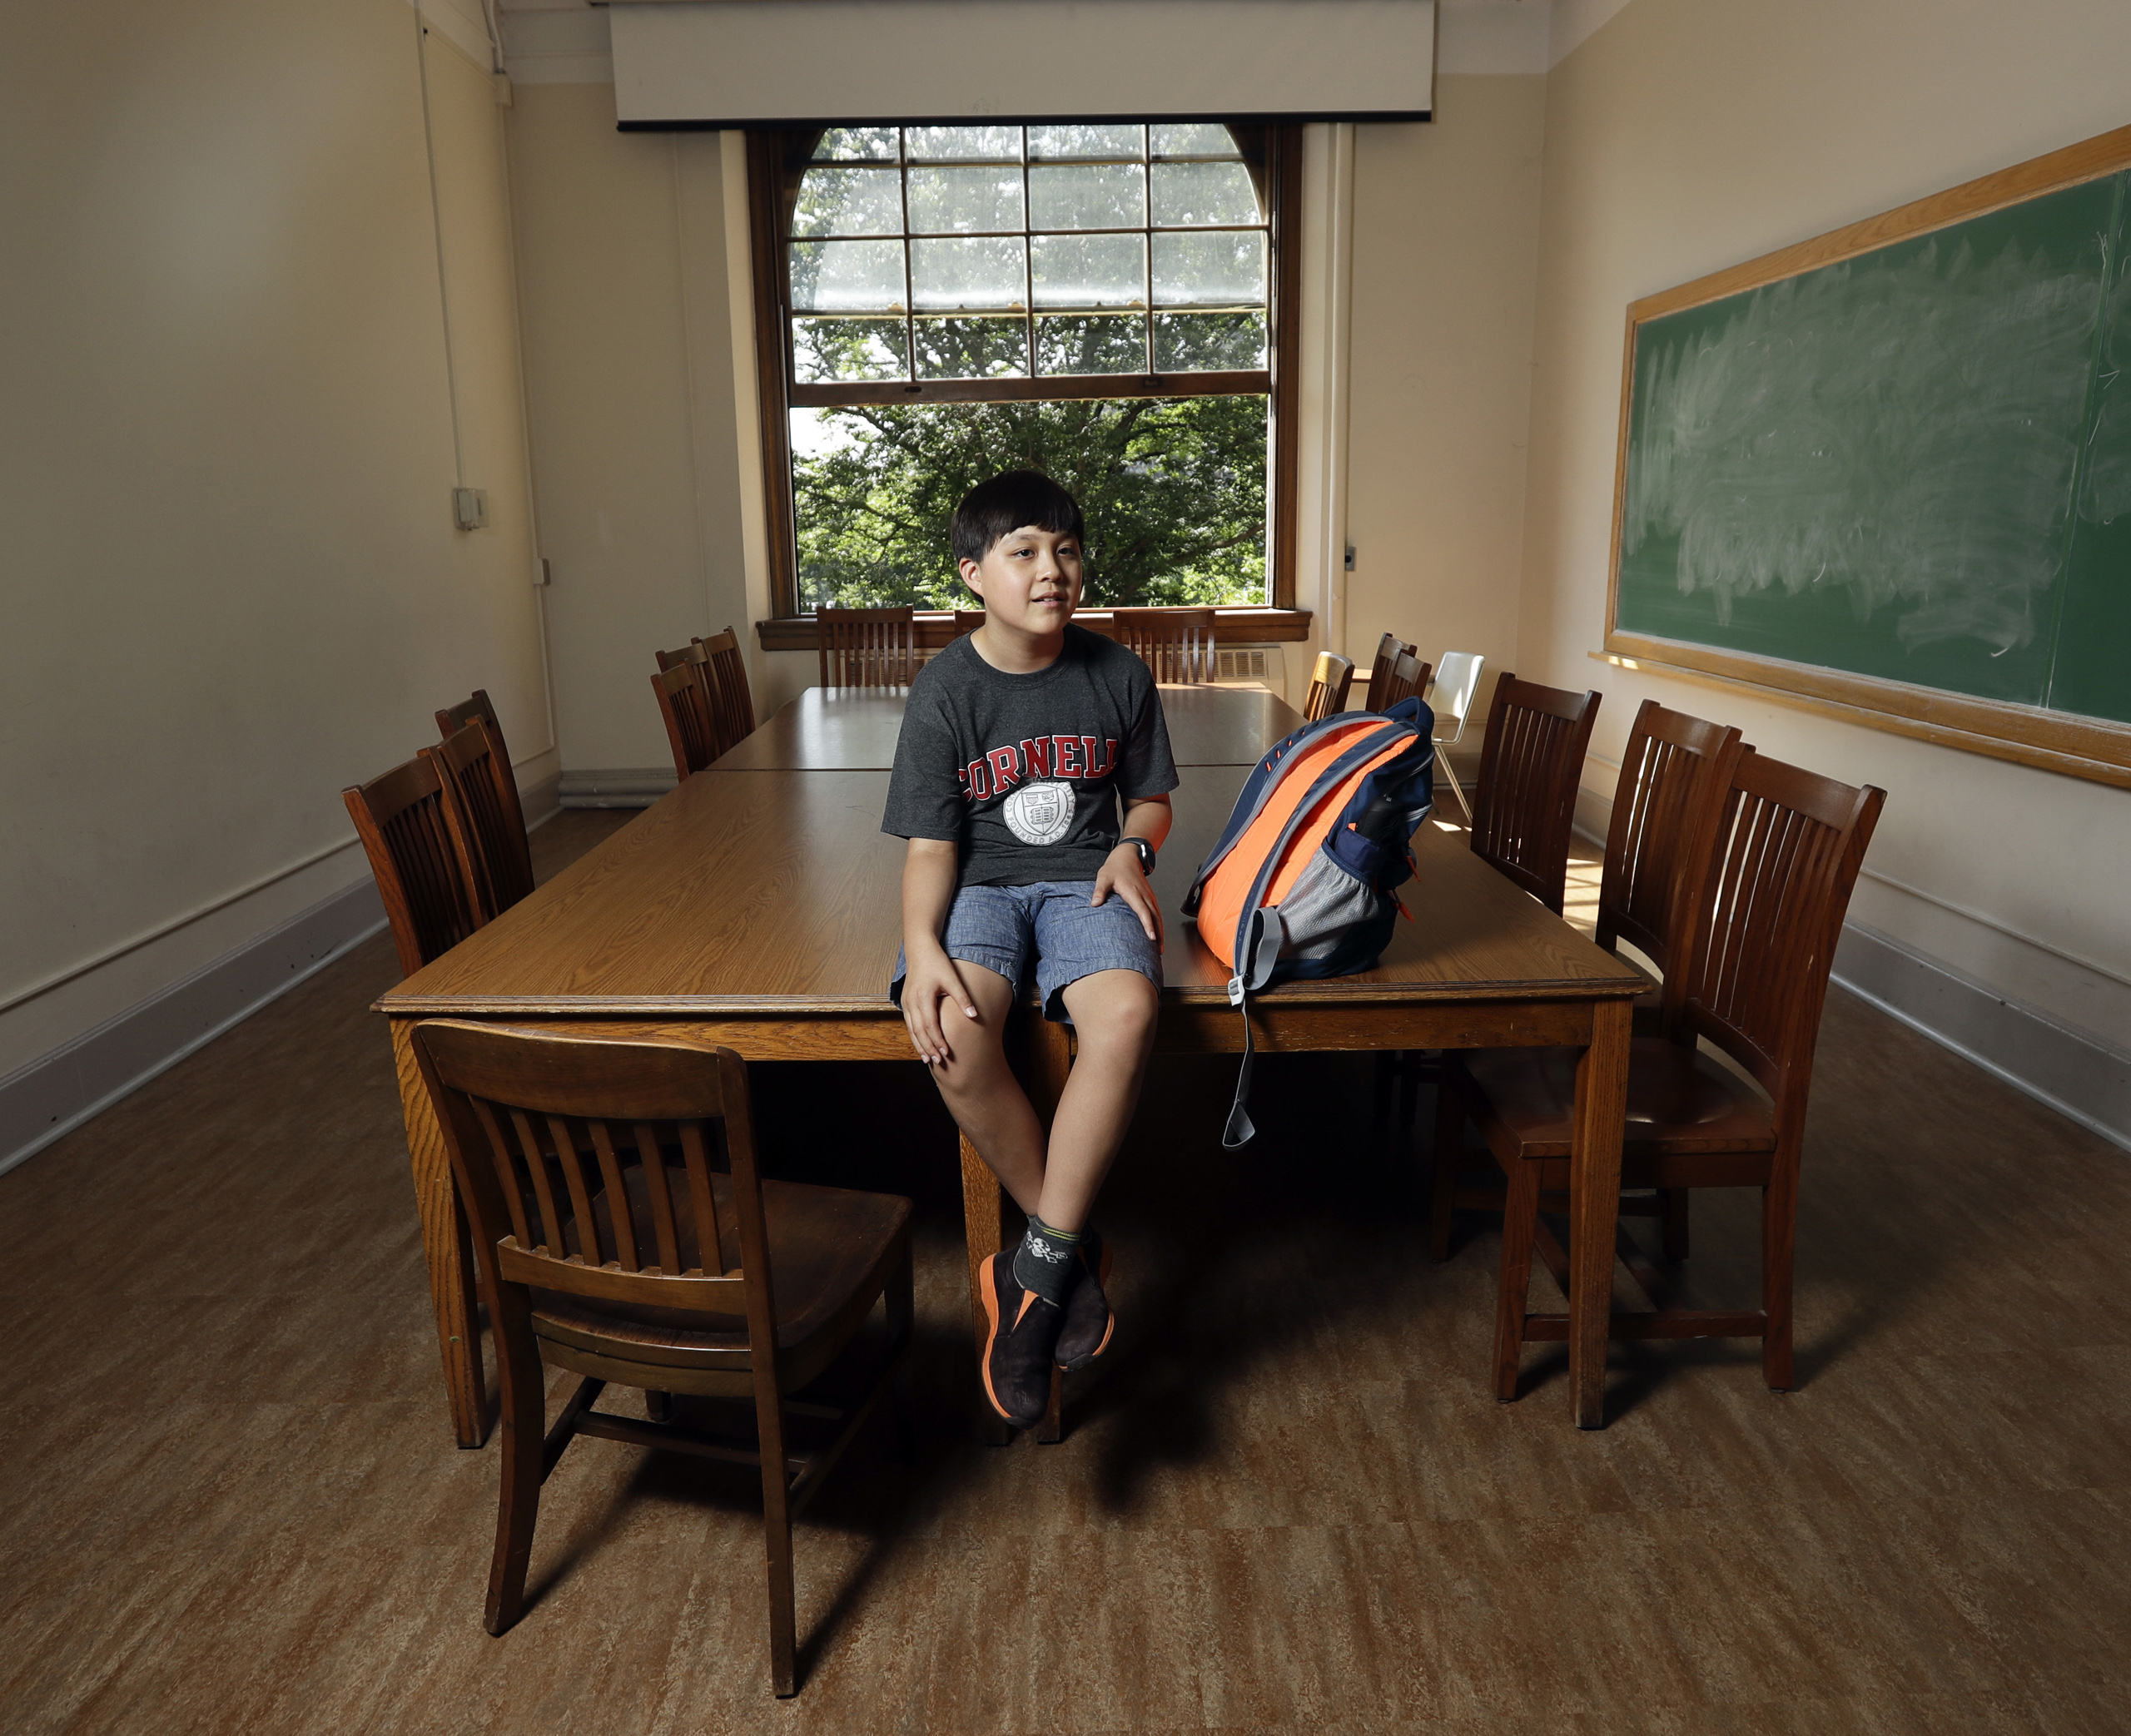 Jeremy Shuler, 12, a freshman at Cornell University, poses on campus in Ithaca, N.Y. He’s the youngest student on record to attend the Ivy League school on Aug. 26, 2016. (Mike Groll—AP)